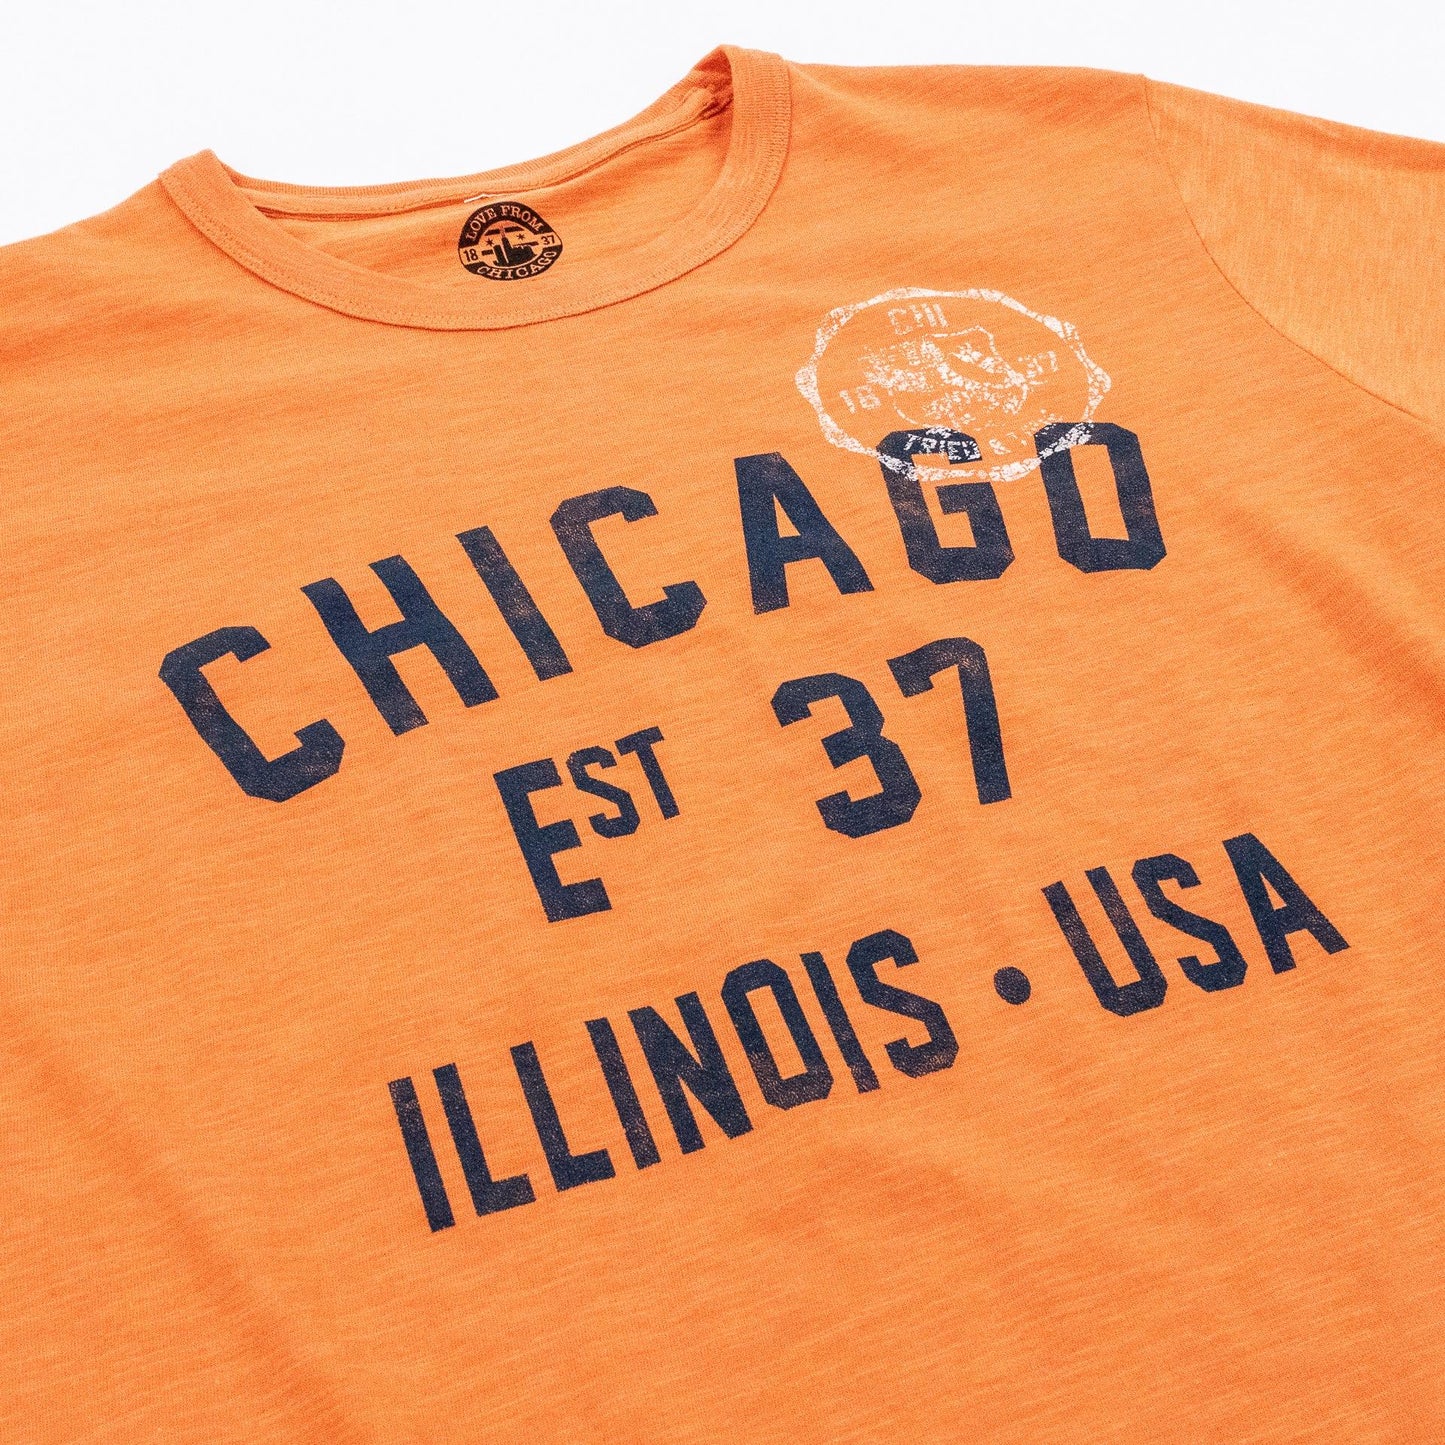 Chicago Honorable Merit Tee - Love From USA